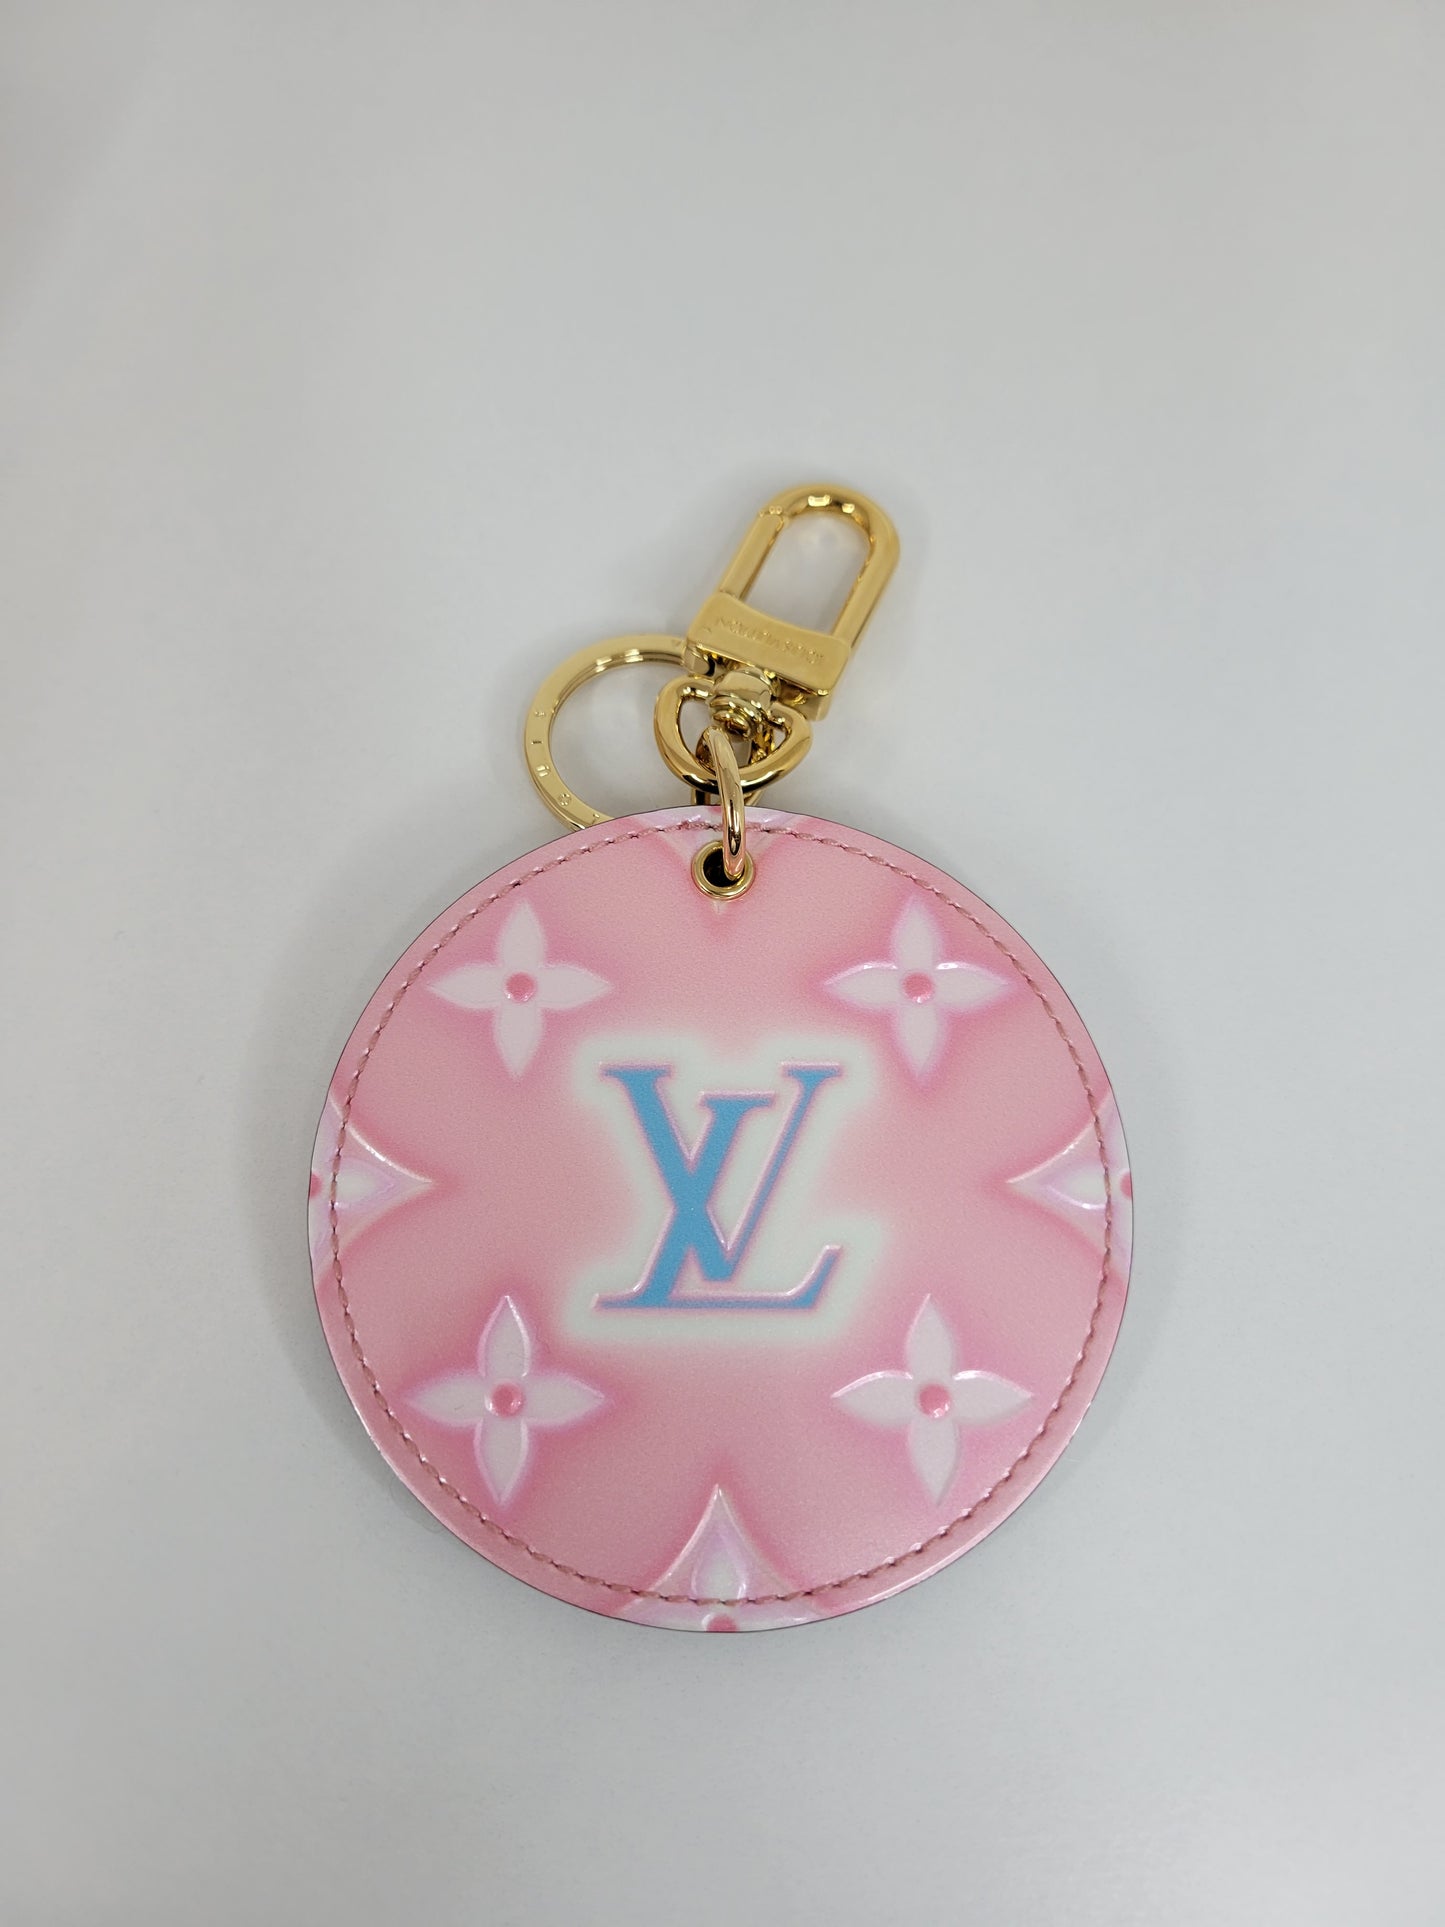 Louis Vuitton Valentine's Day Accessories & SLGs - BAGAHOLICBOY